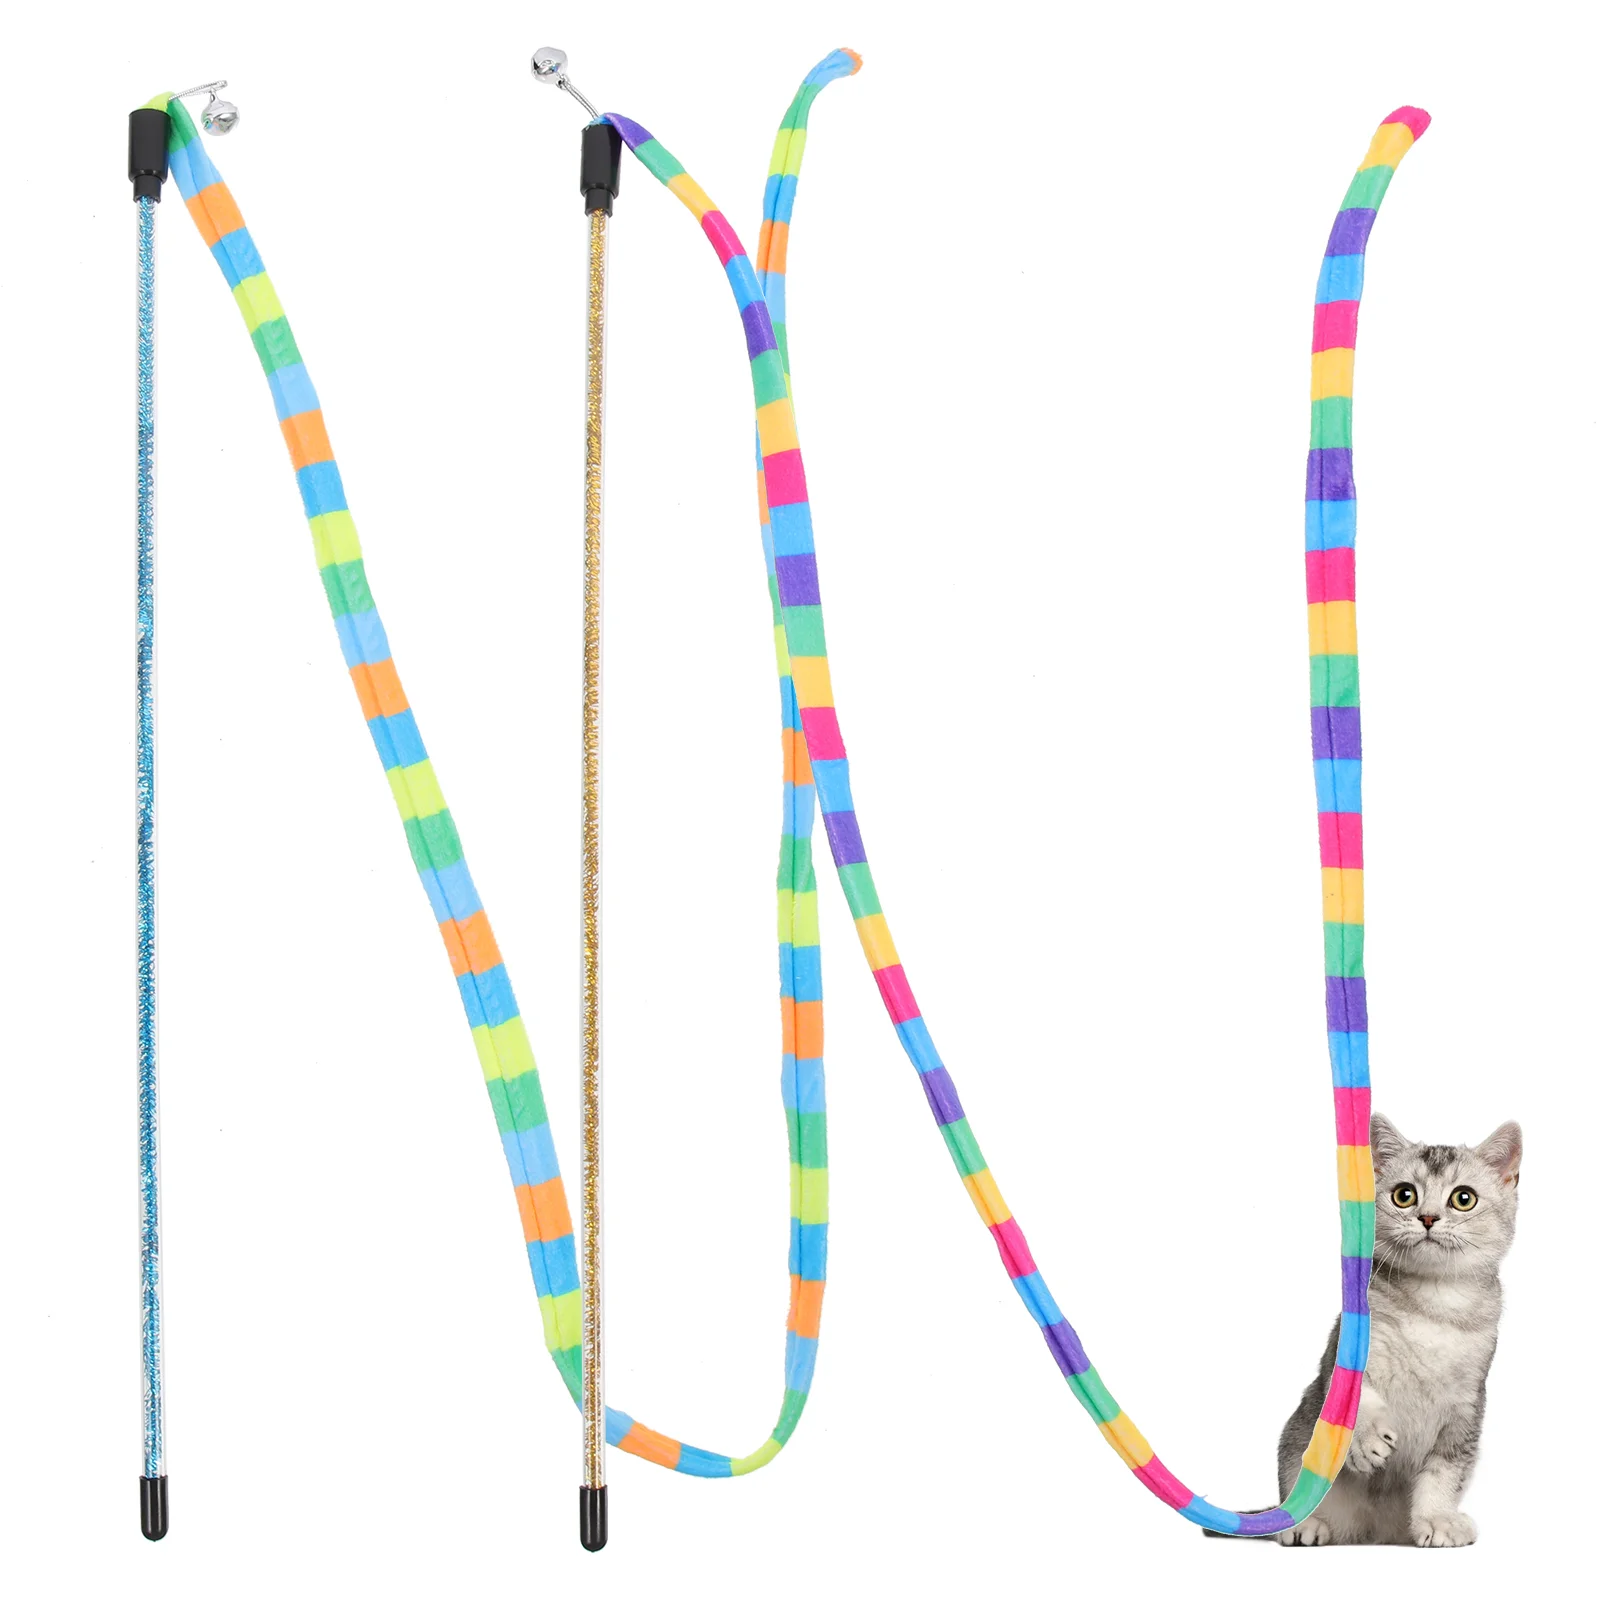 

Cat Toy Toys Wand Teaser Interactive Kitten Indoor Catswands Ribbonrainbow Chew Treat Scratch Rope Wire Exrecise Teasing Pole